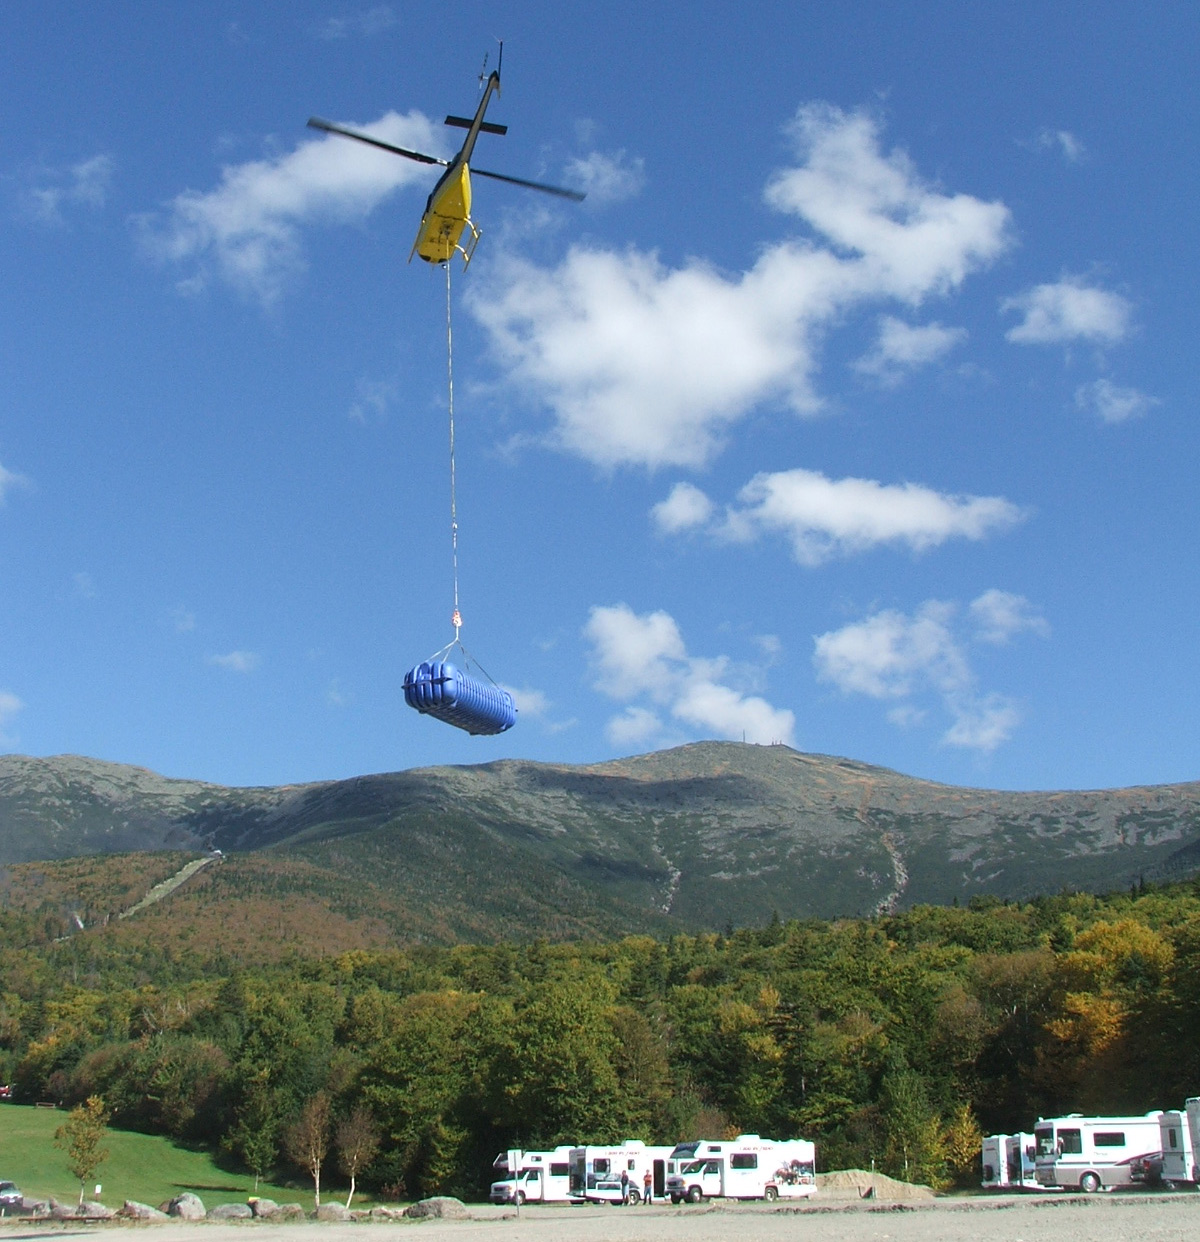 Helicopter Delivering a water tank, by Water Industries, LLC.